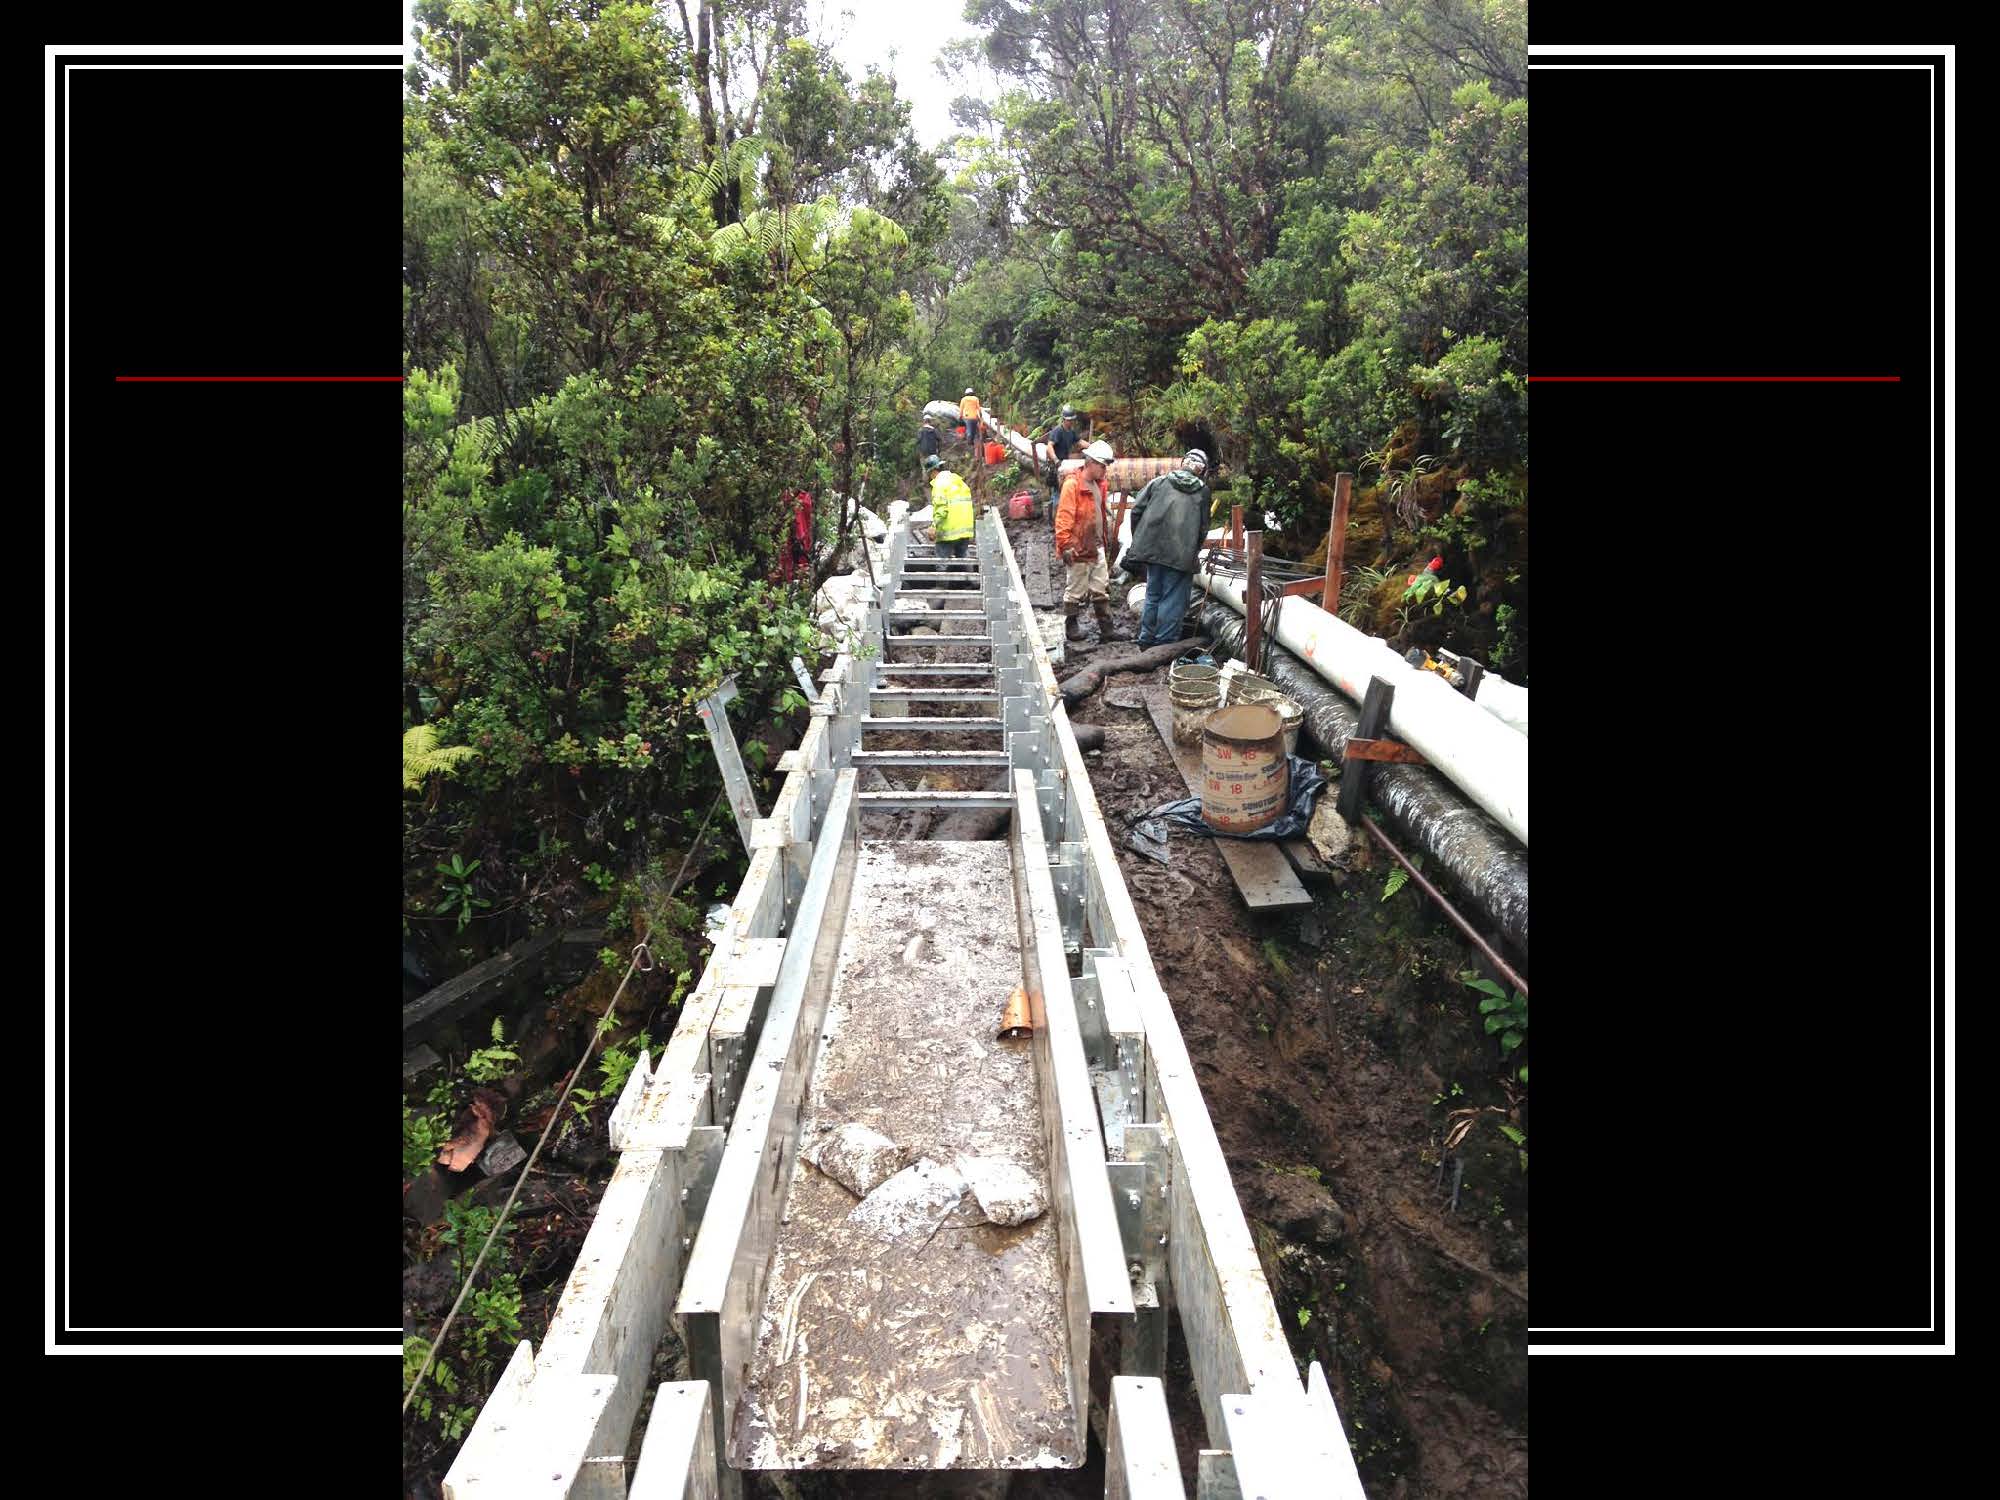 Before-and-after photos of the Waikamoi flume renovation